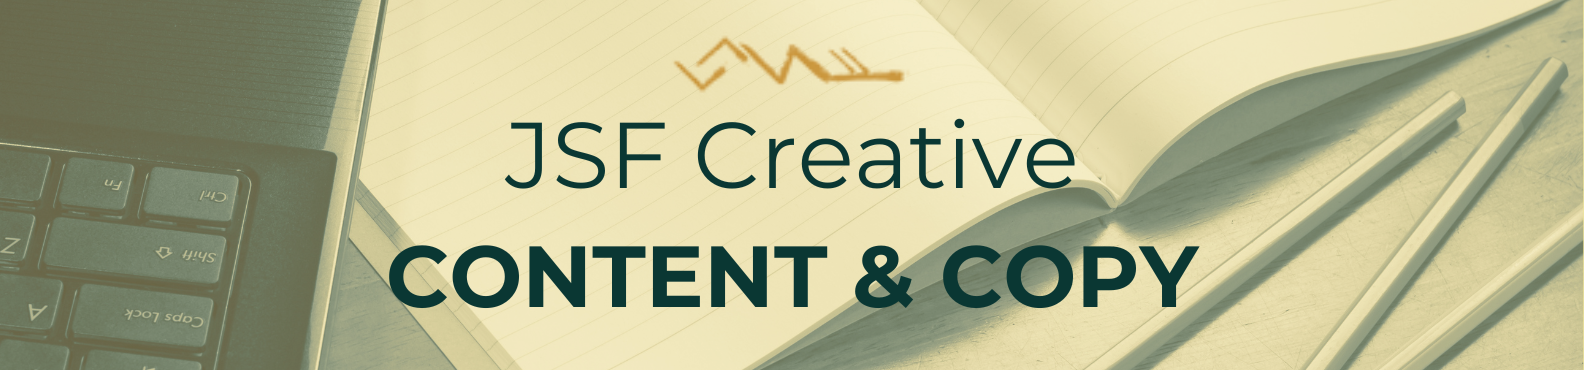 JSF Creative Content & Copy Banner